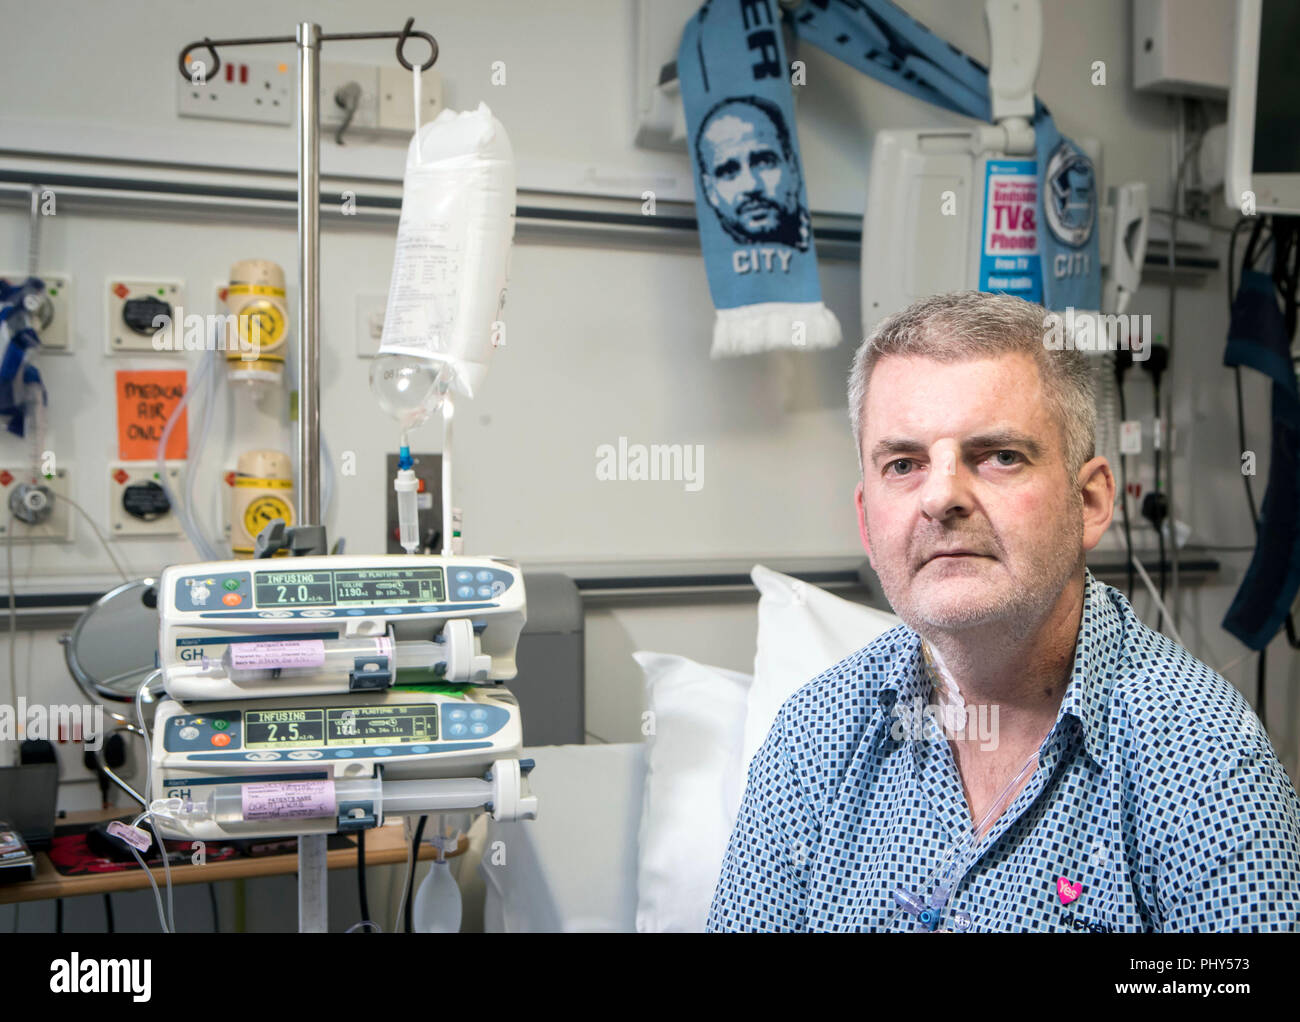 Gareth Evans, 45, from Stockport, at Wythenshawe Hospital in Manchester. Mr Evans, who has been on the heart transplant waiting list since February 2009, longer than anyone else in the UK, is appealing for people to join the organ donor register. Stock Photo